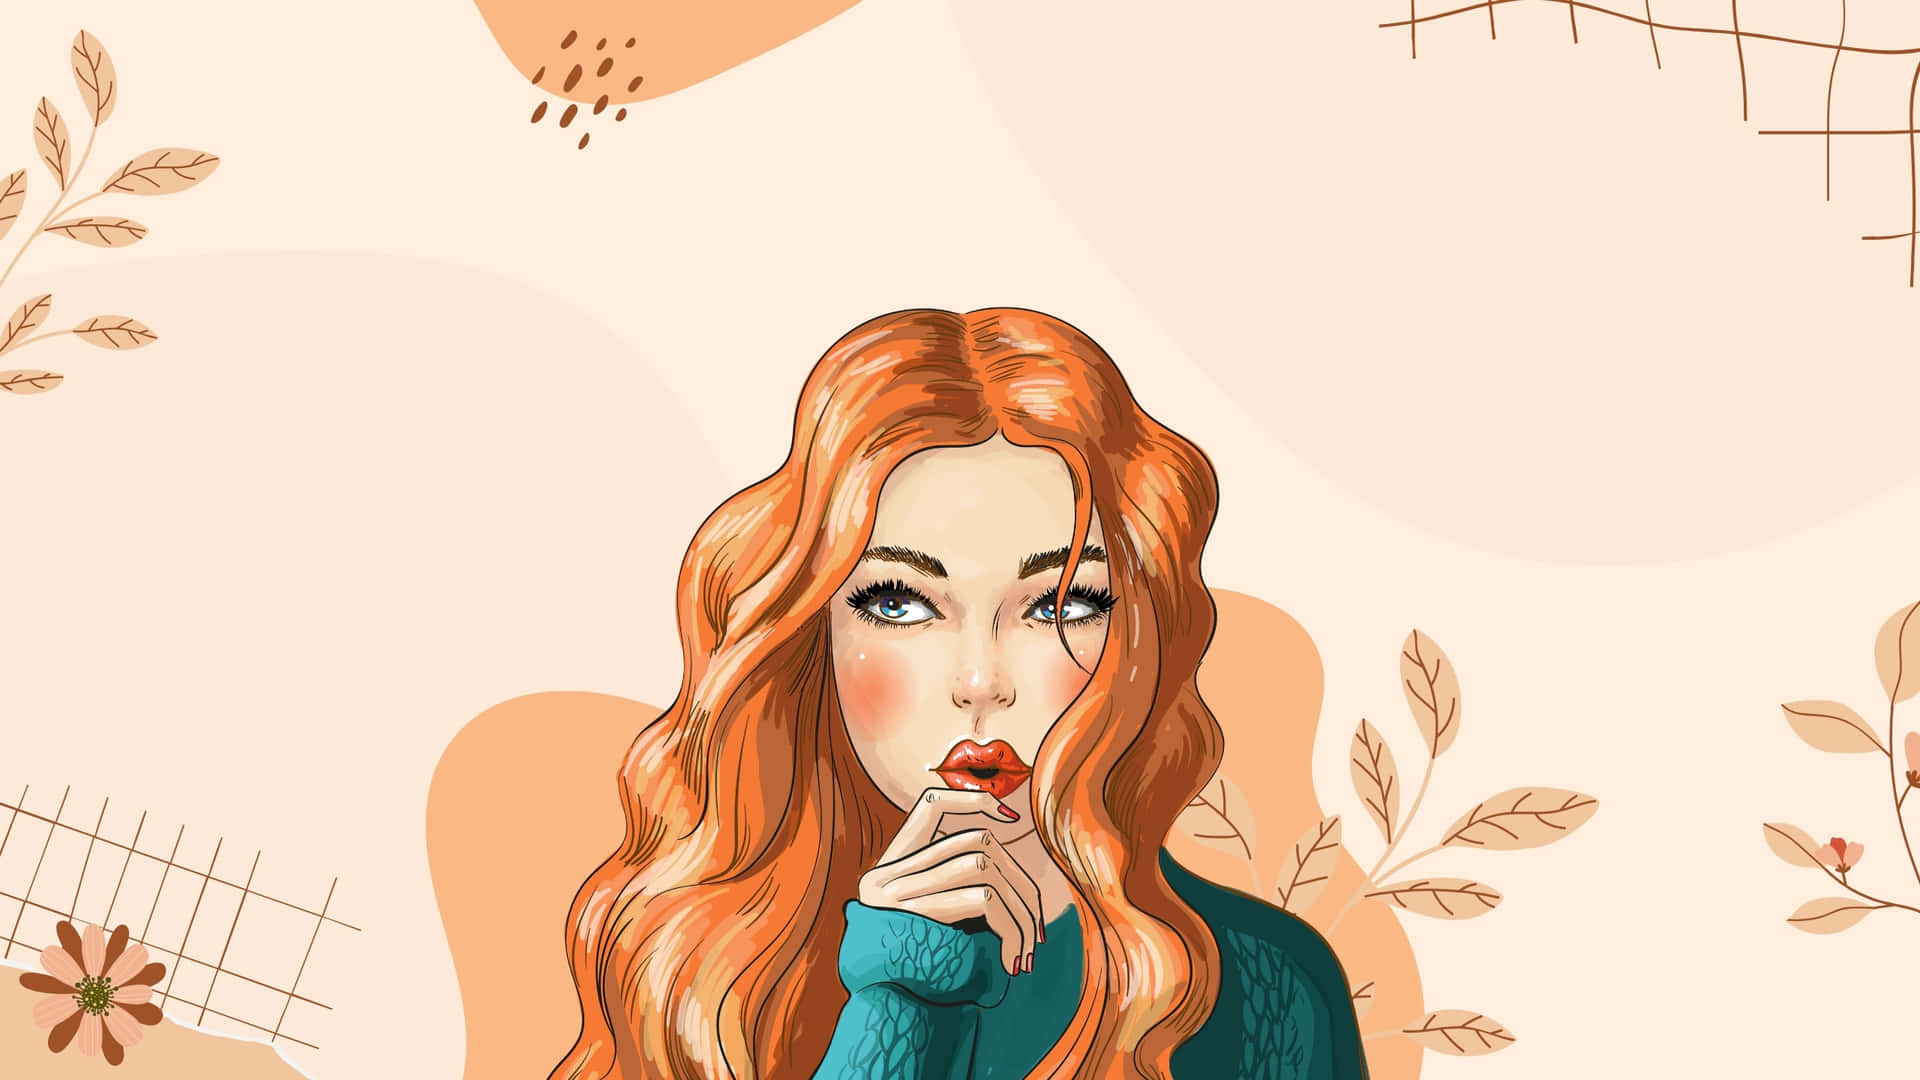 Preppy Girl Autumn Thoughts Wallpaper